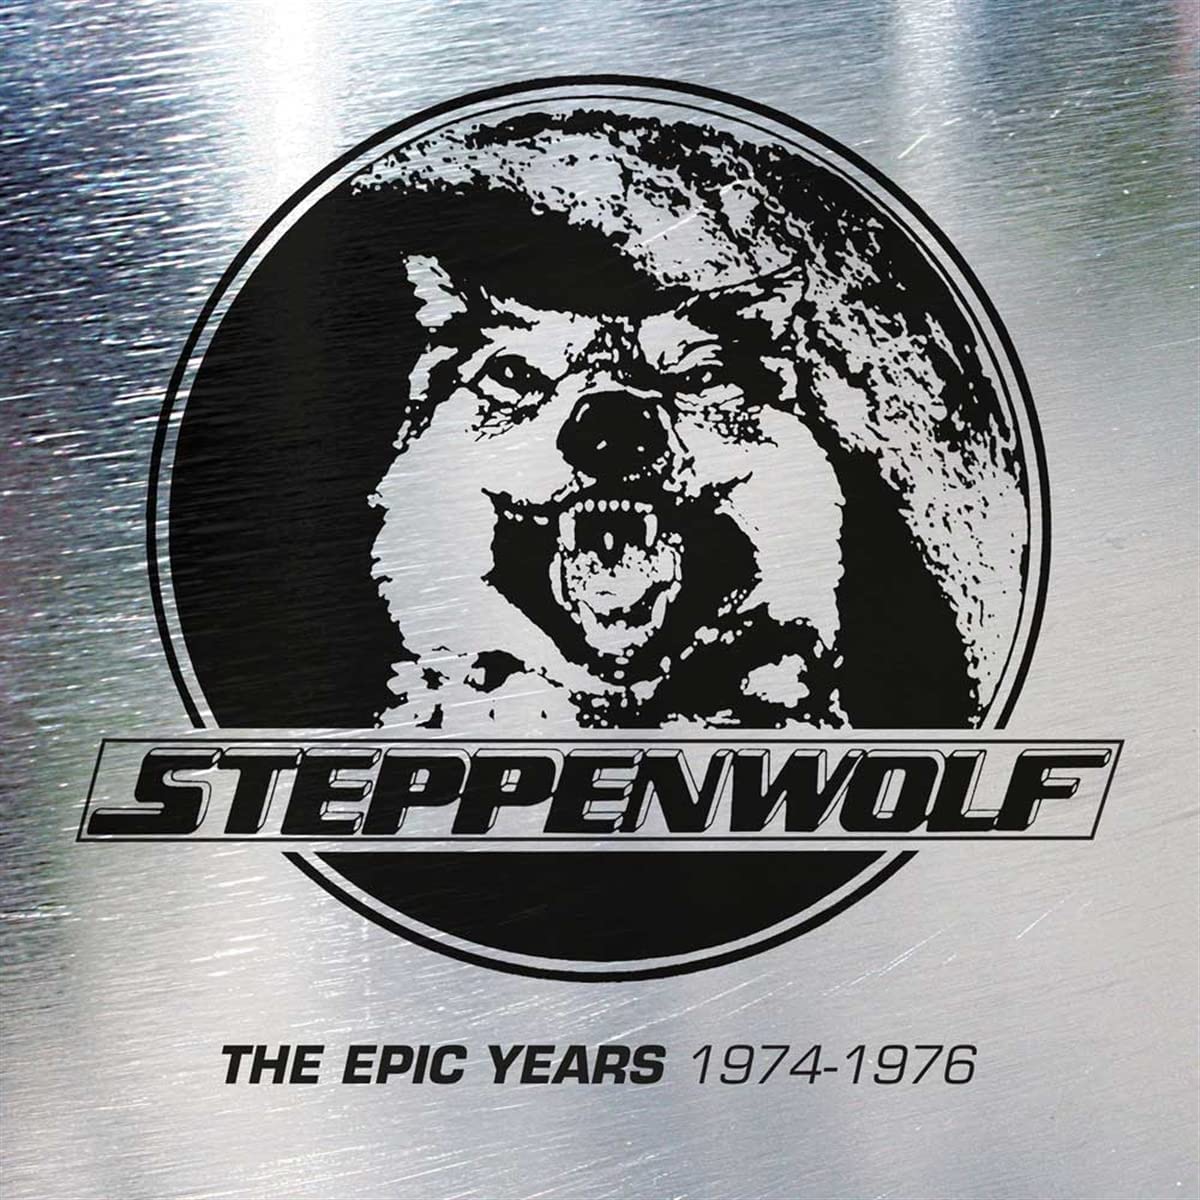 Steppenwolf - The Epic Years 1974-1979 - 3CD